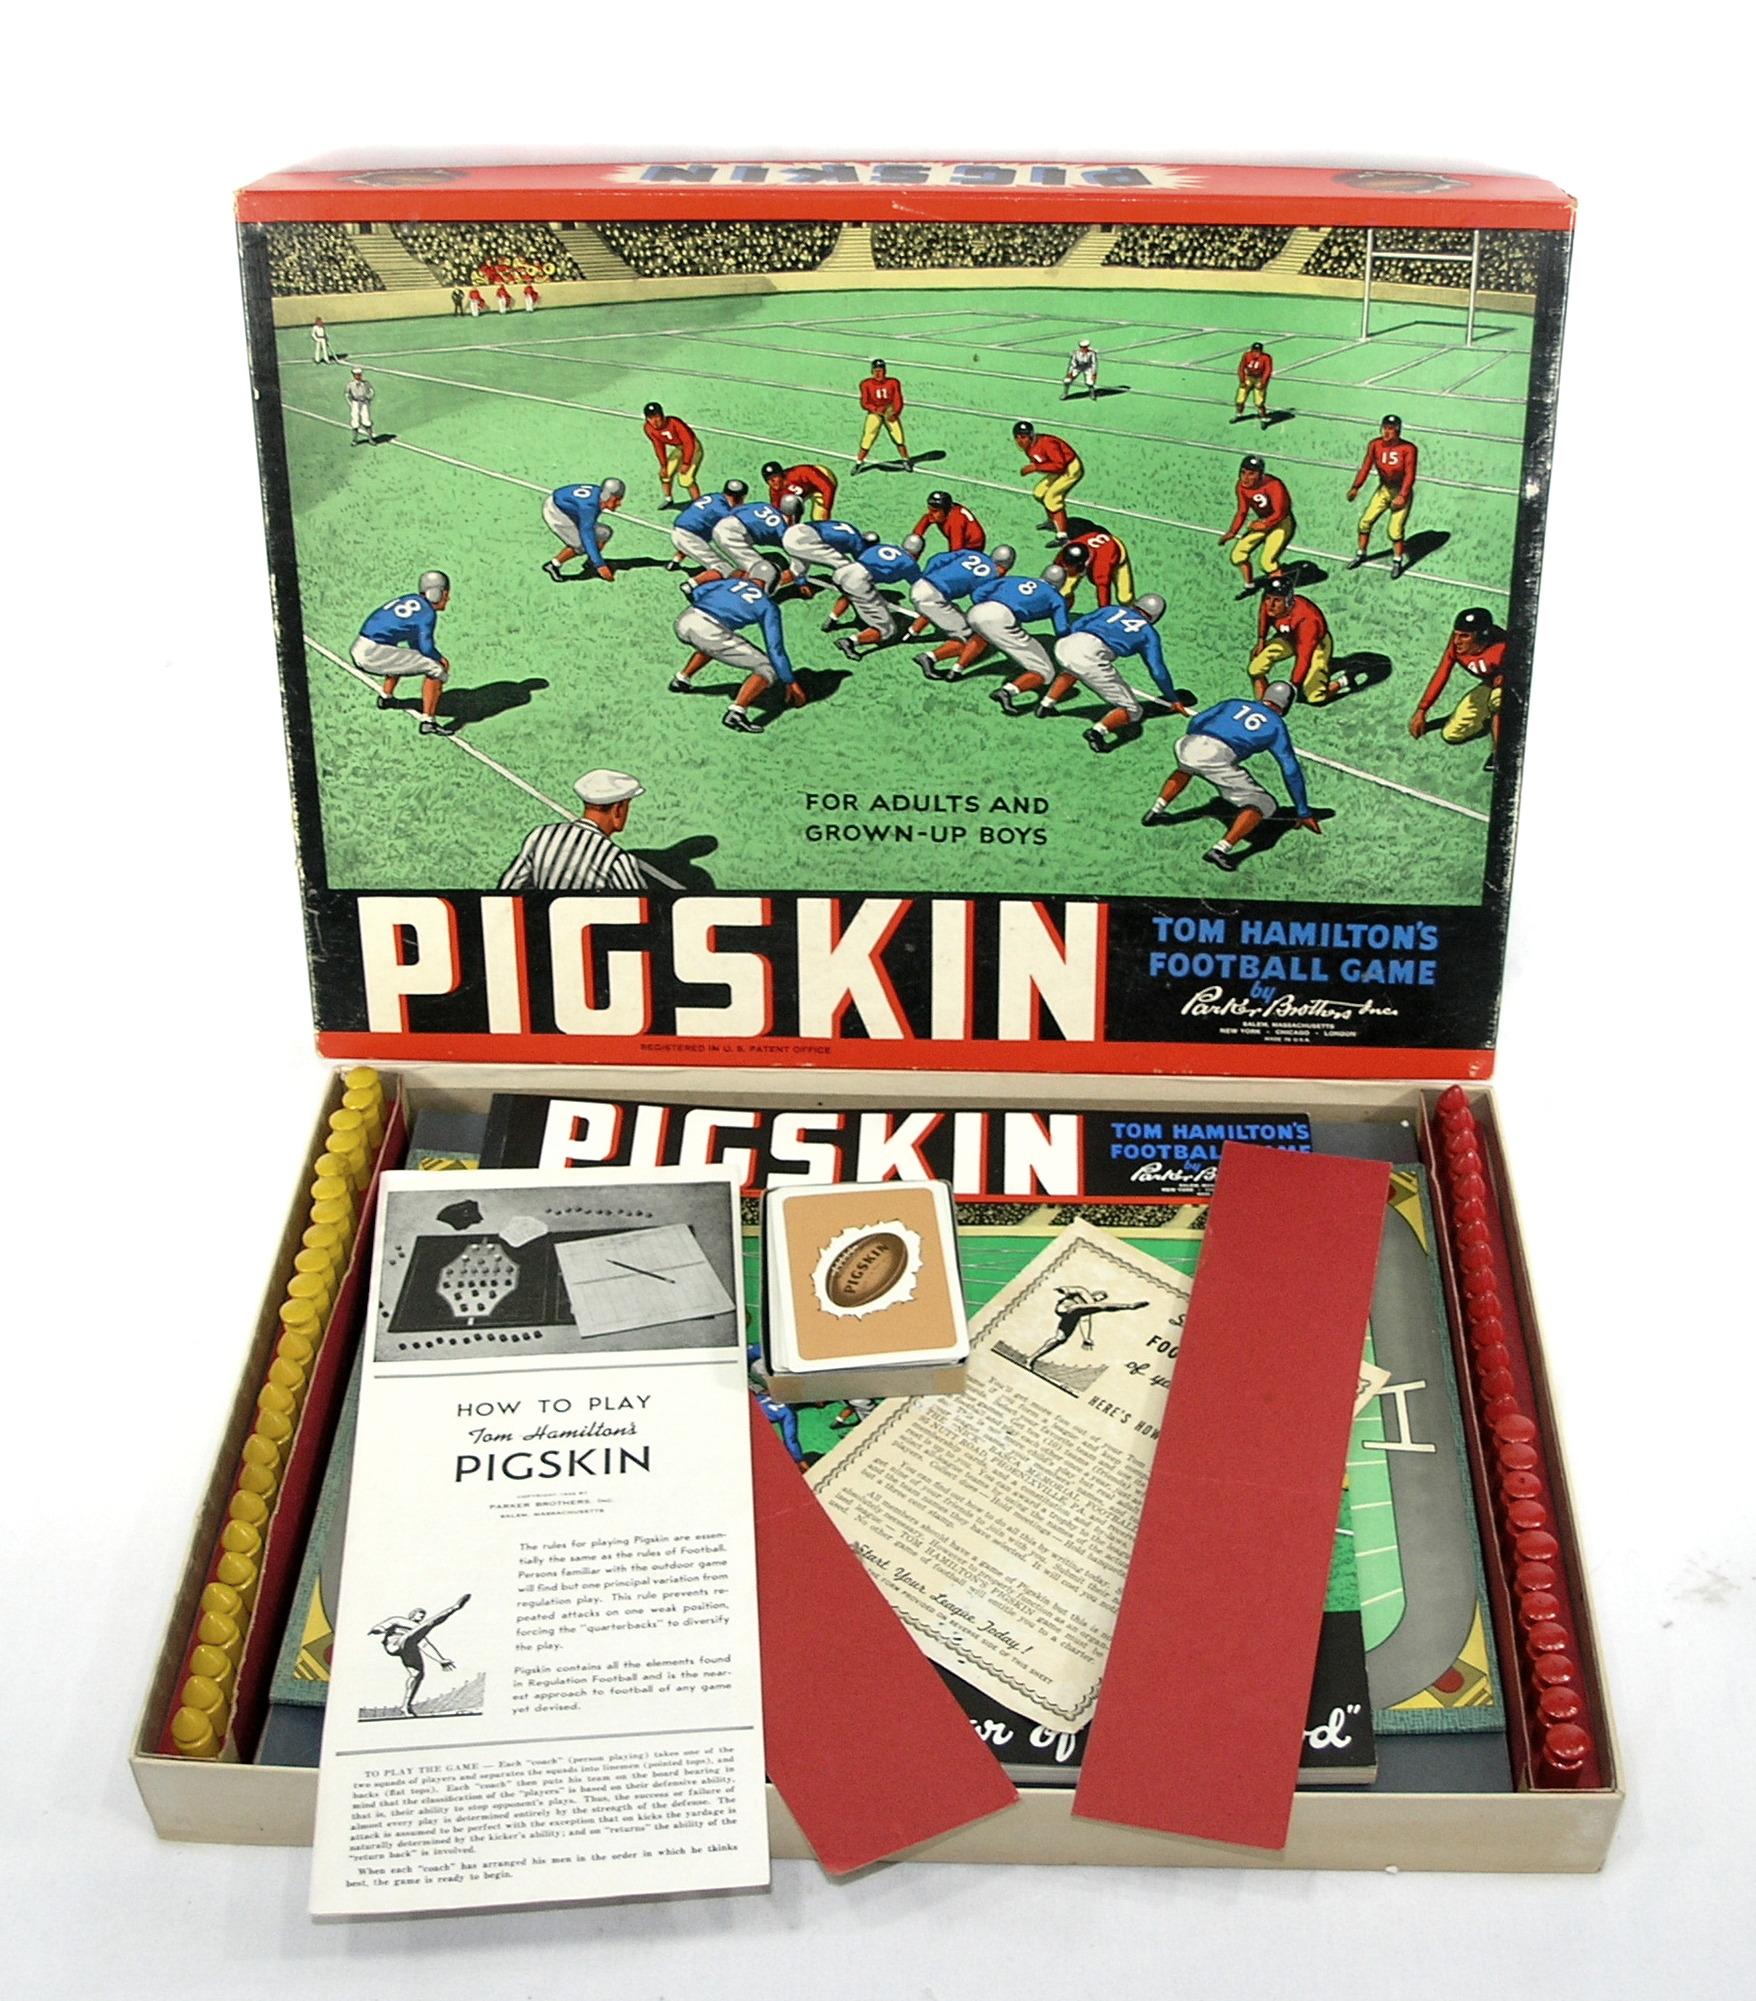 1946 Tom Hamiltons "Pigskin" Football Board Game by Parker Brothers Inc. Co